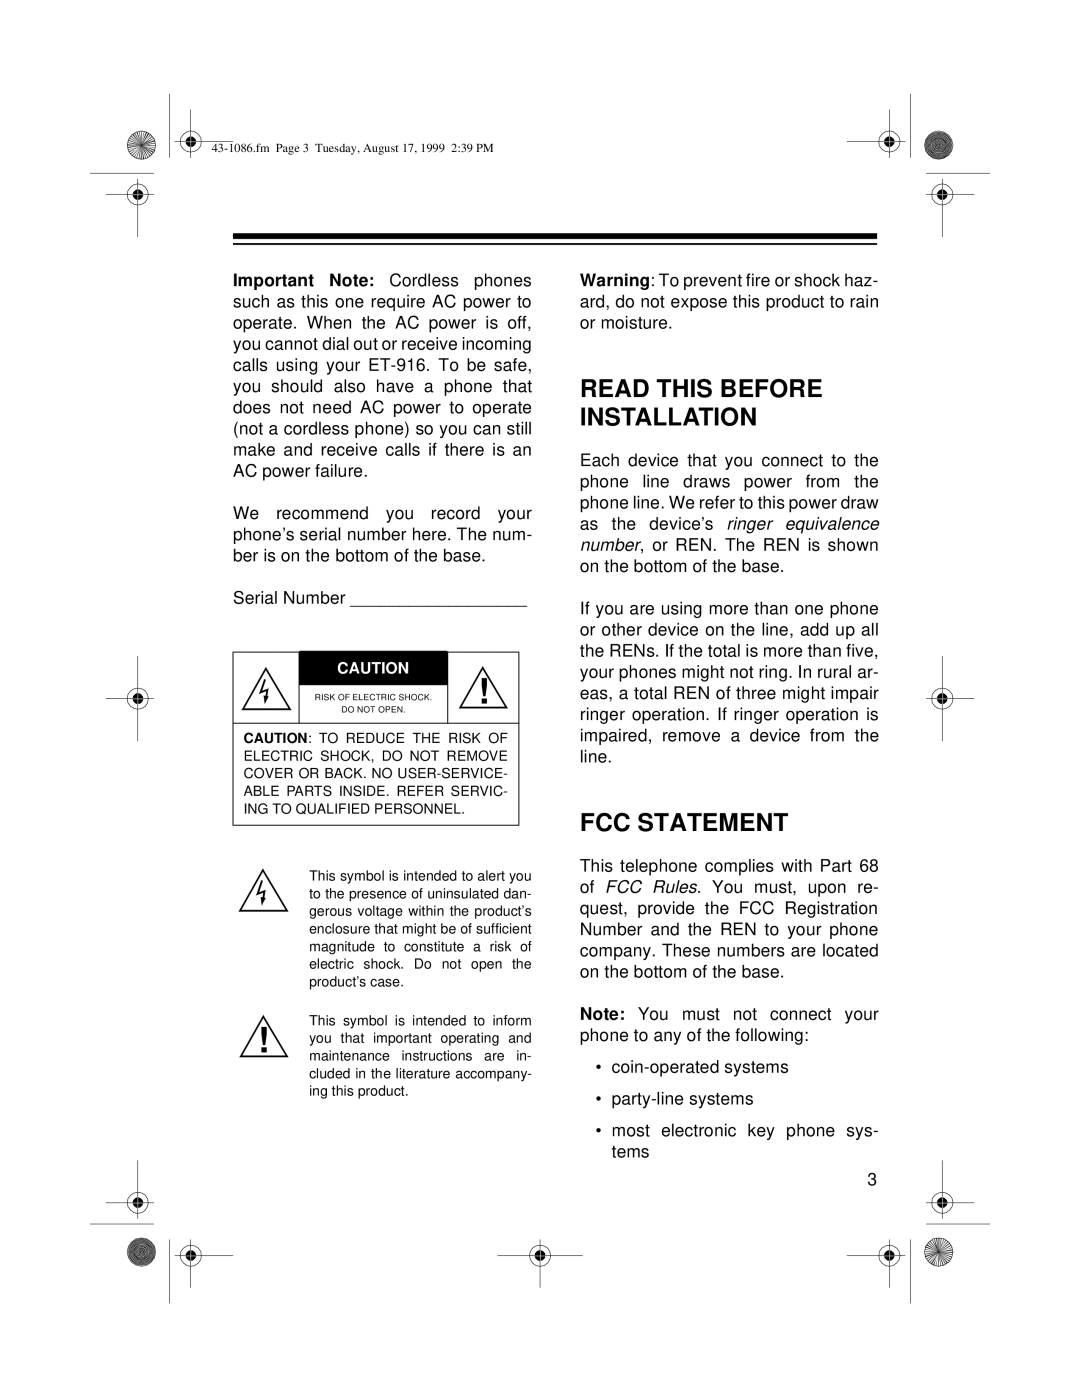 Radio Shack ET-916 owner manual Read This Before Installation, Fcc Statement 